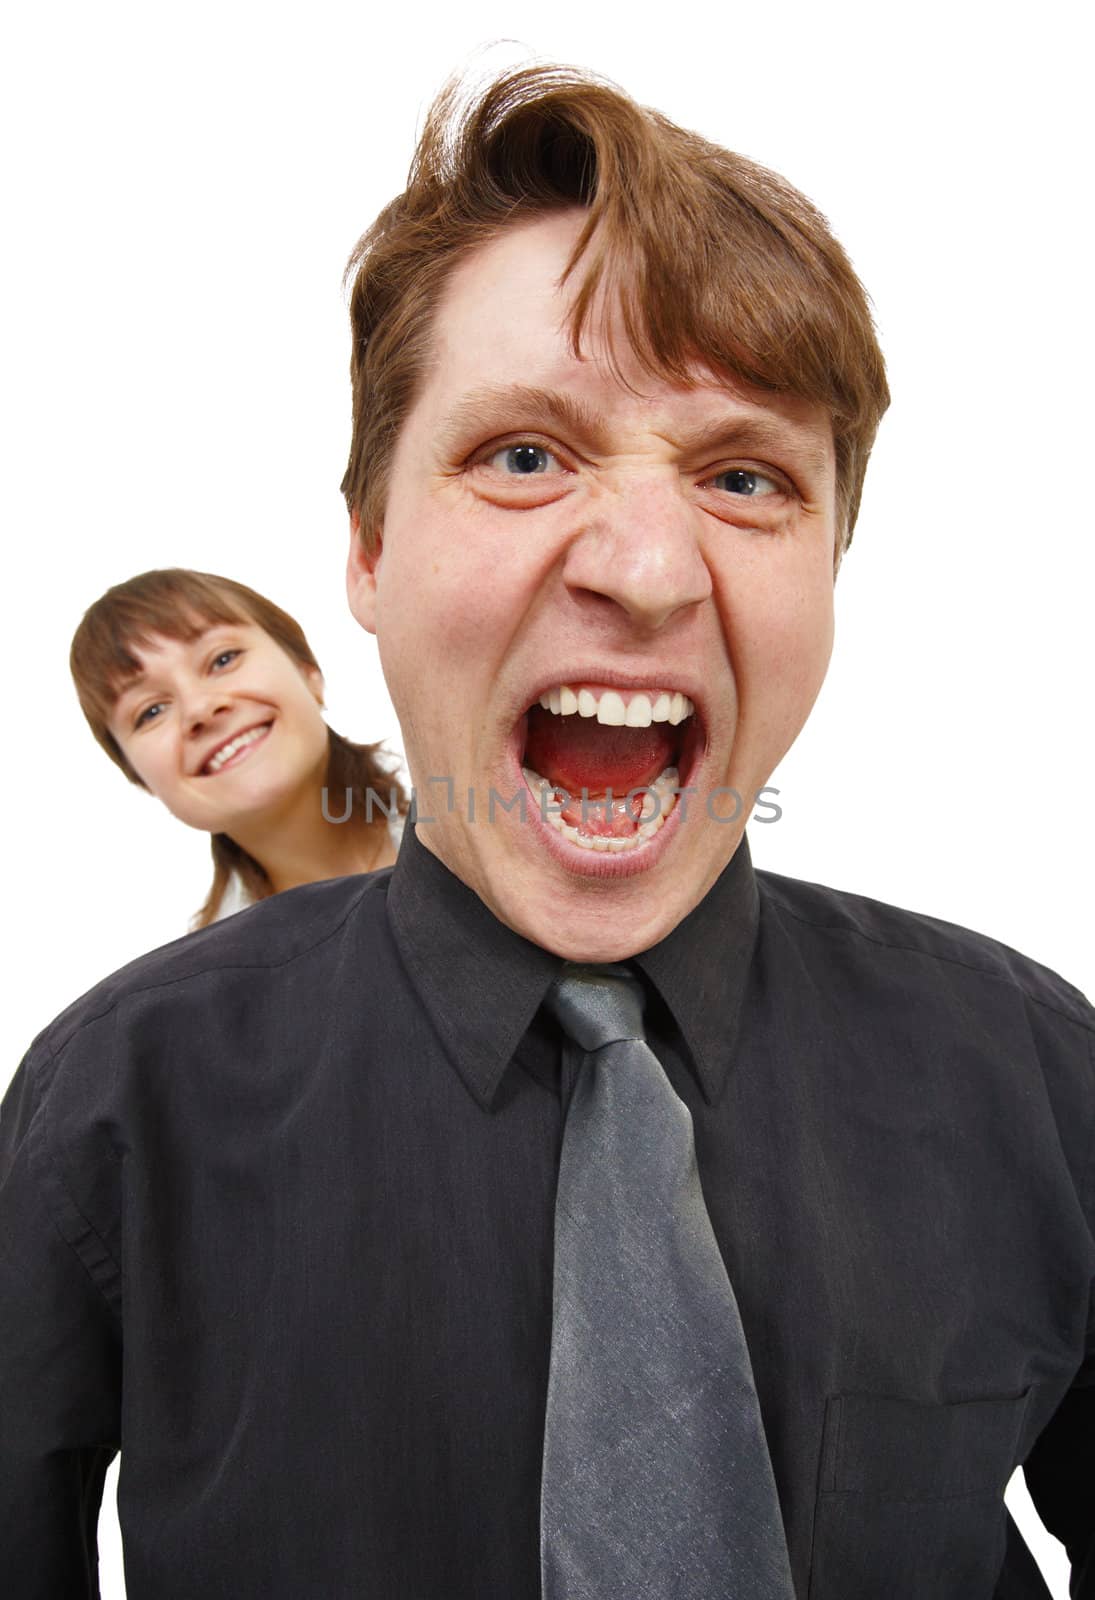 A man in a rage and shouted loudly. Woman happy. Isolated on white.